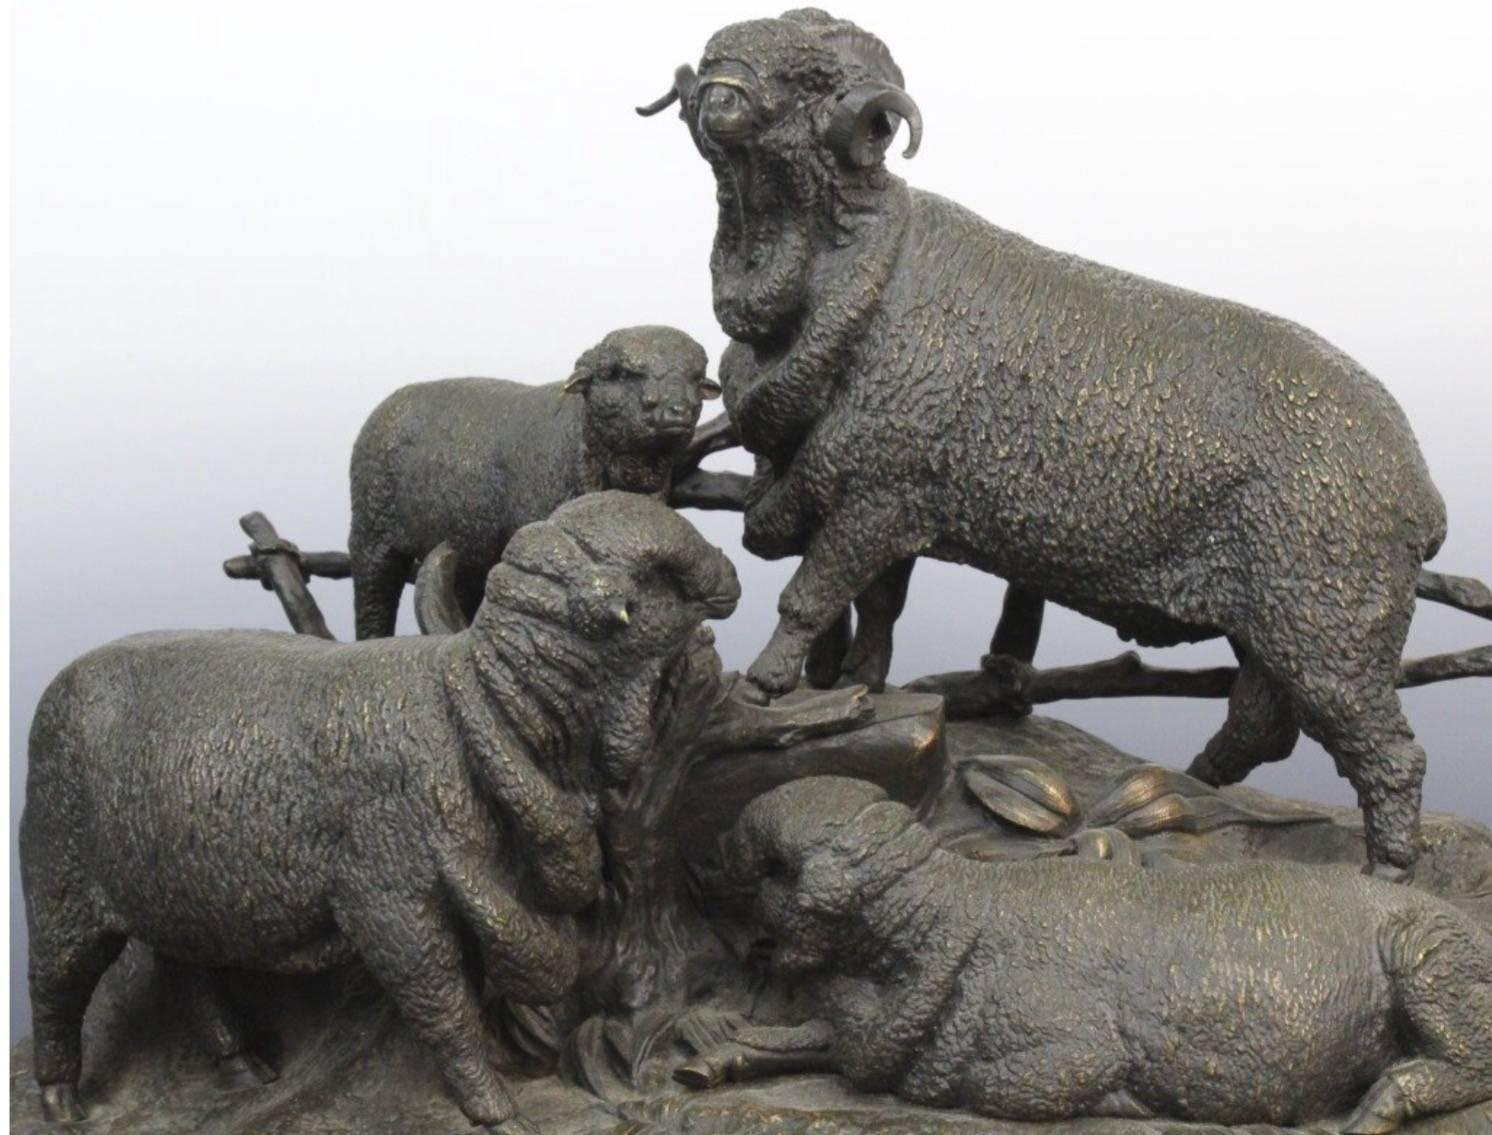 Antique figural grouping of a Ram or Sheep family by Jules Moigniez. Cast bronze construction with very nice detailing and dark patina. Signed on the front. Measures 16